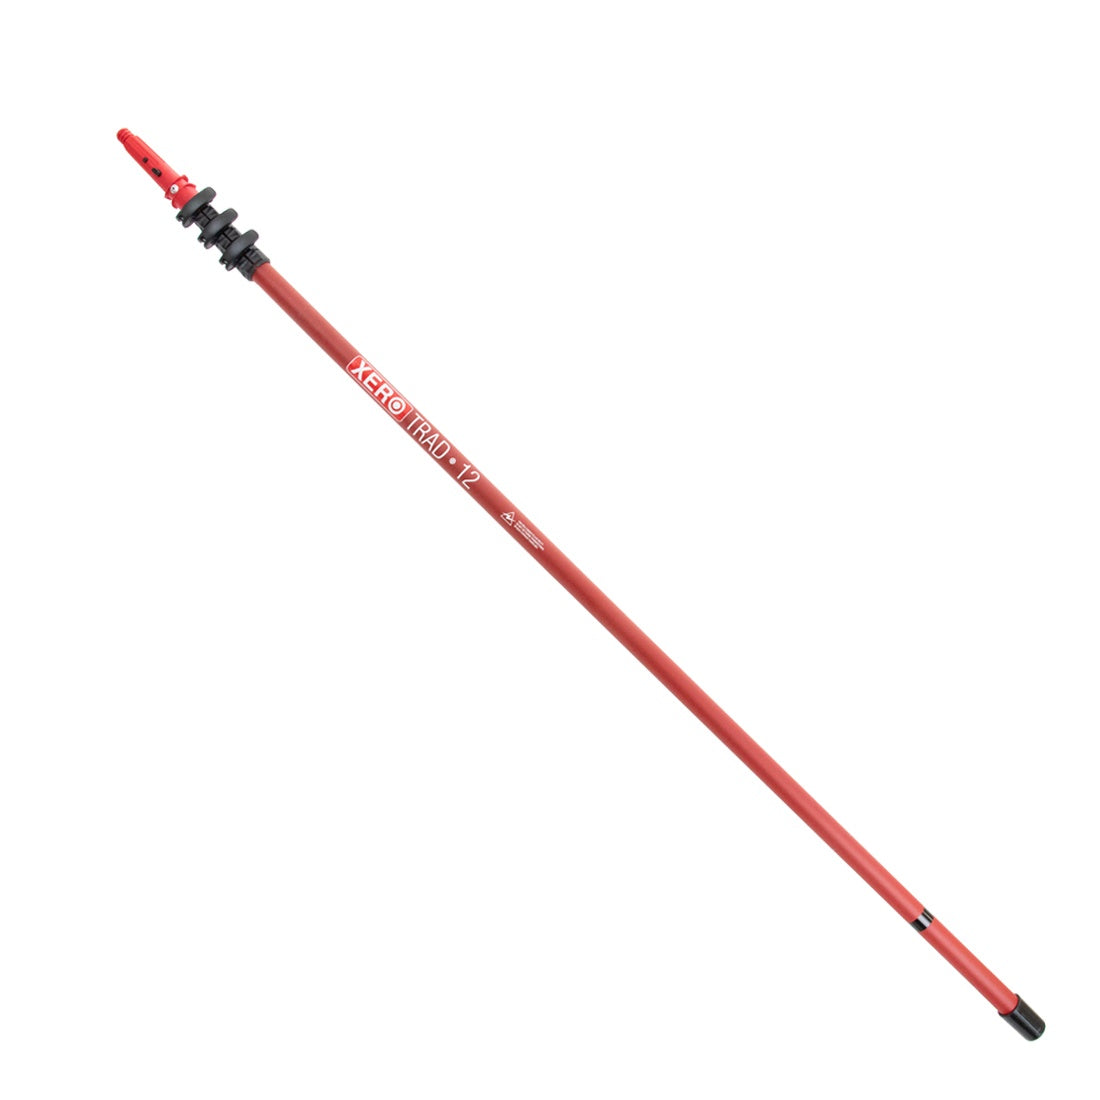 XERO Carbon Fiber Trad Pole 2.0 Unger Pole Tip Red 12 Foot Front View